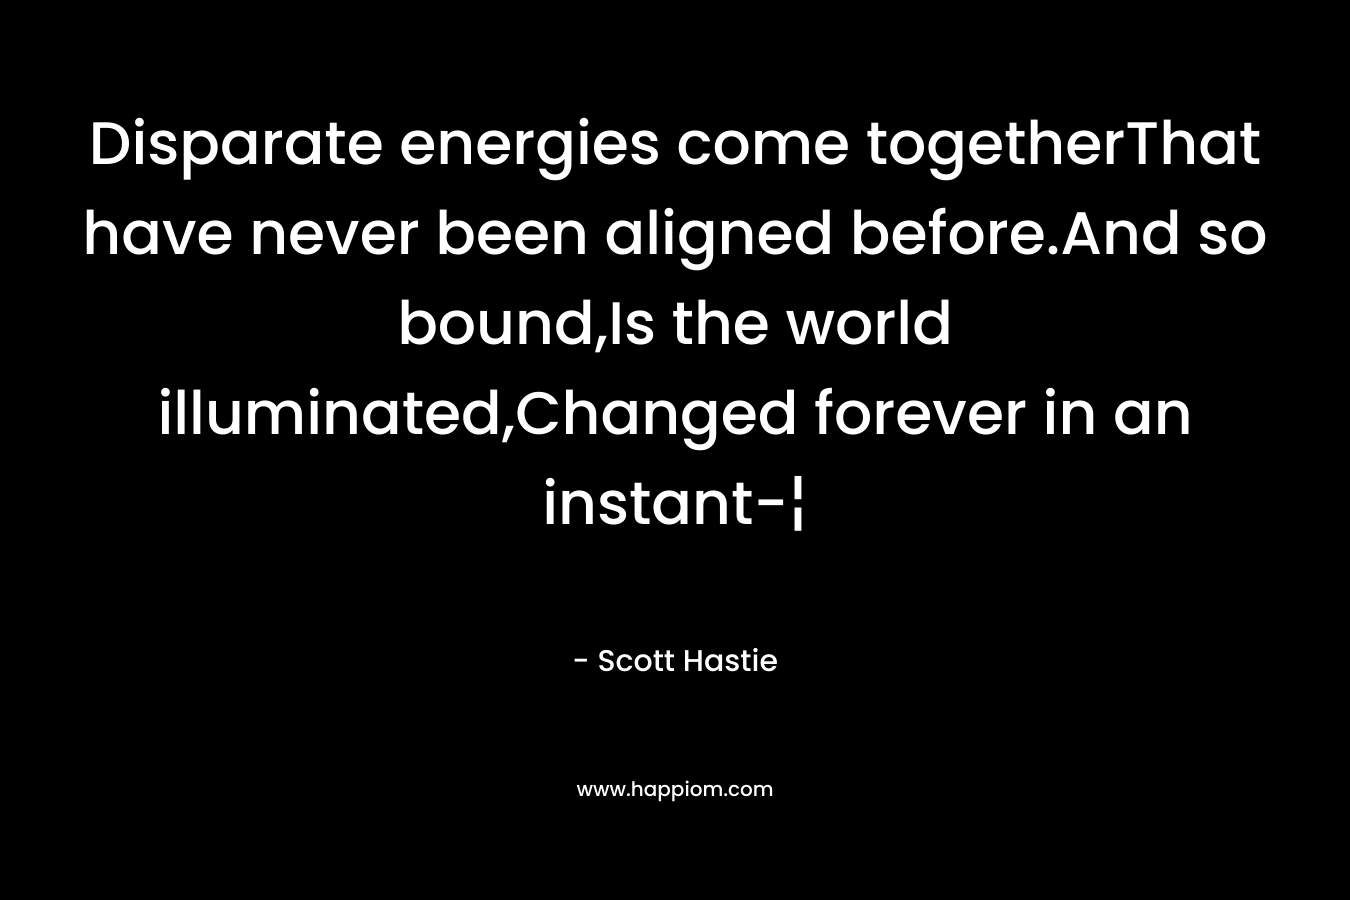 Disparate energies come togetherThat have never been aligned before.And so bound,Is the world illuminated,Changed forever in an instant-¦